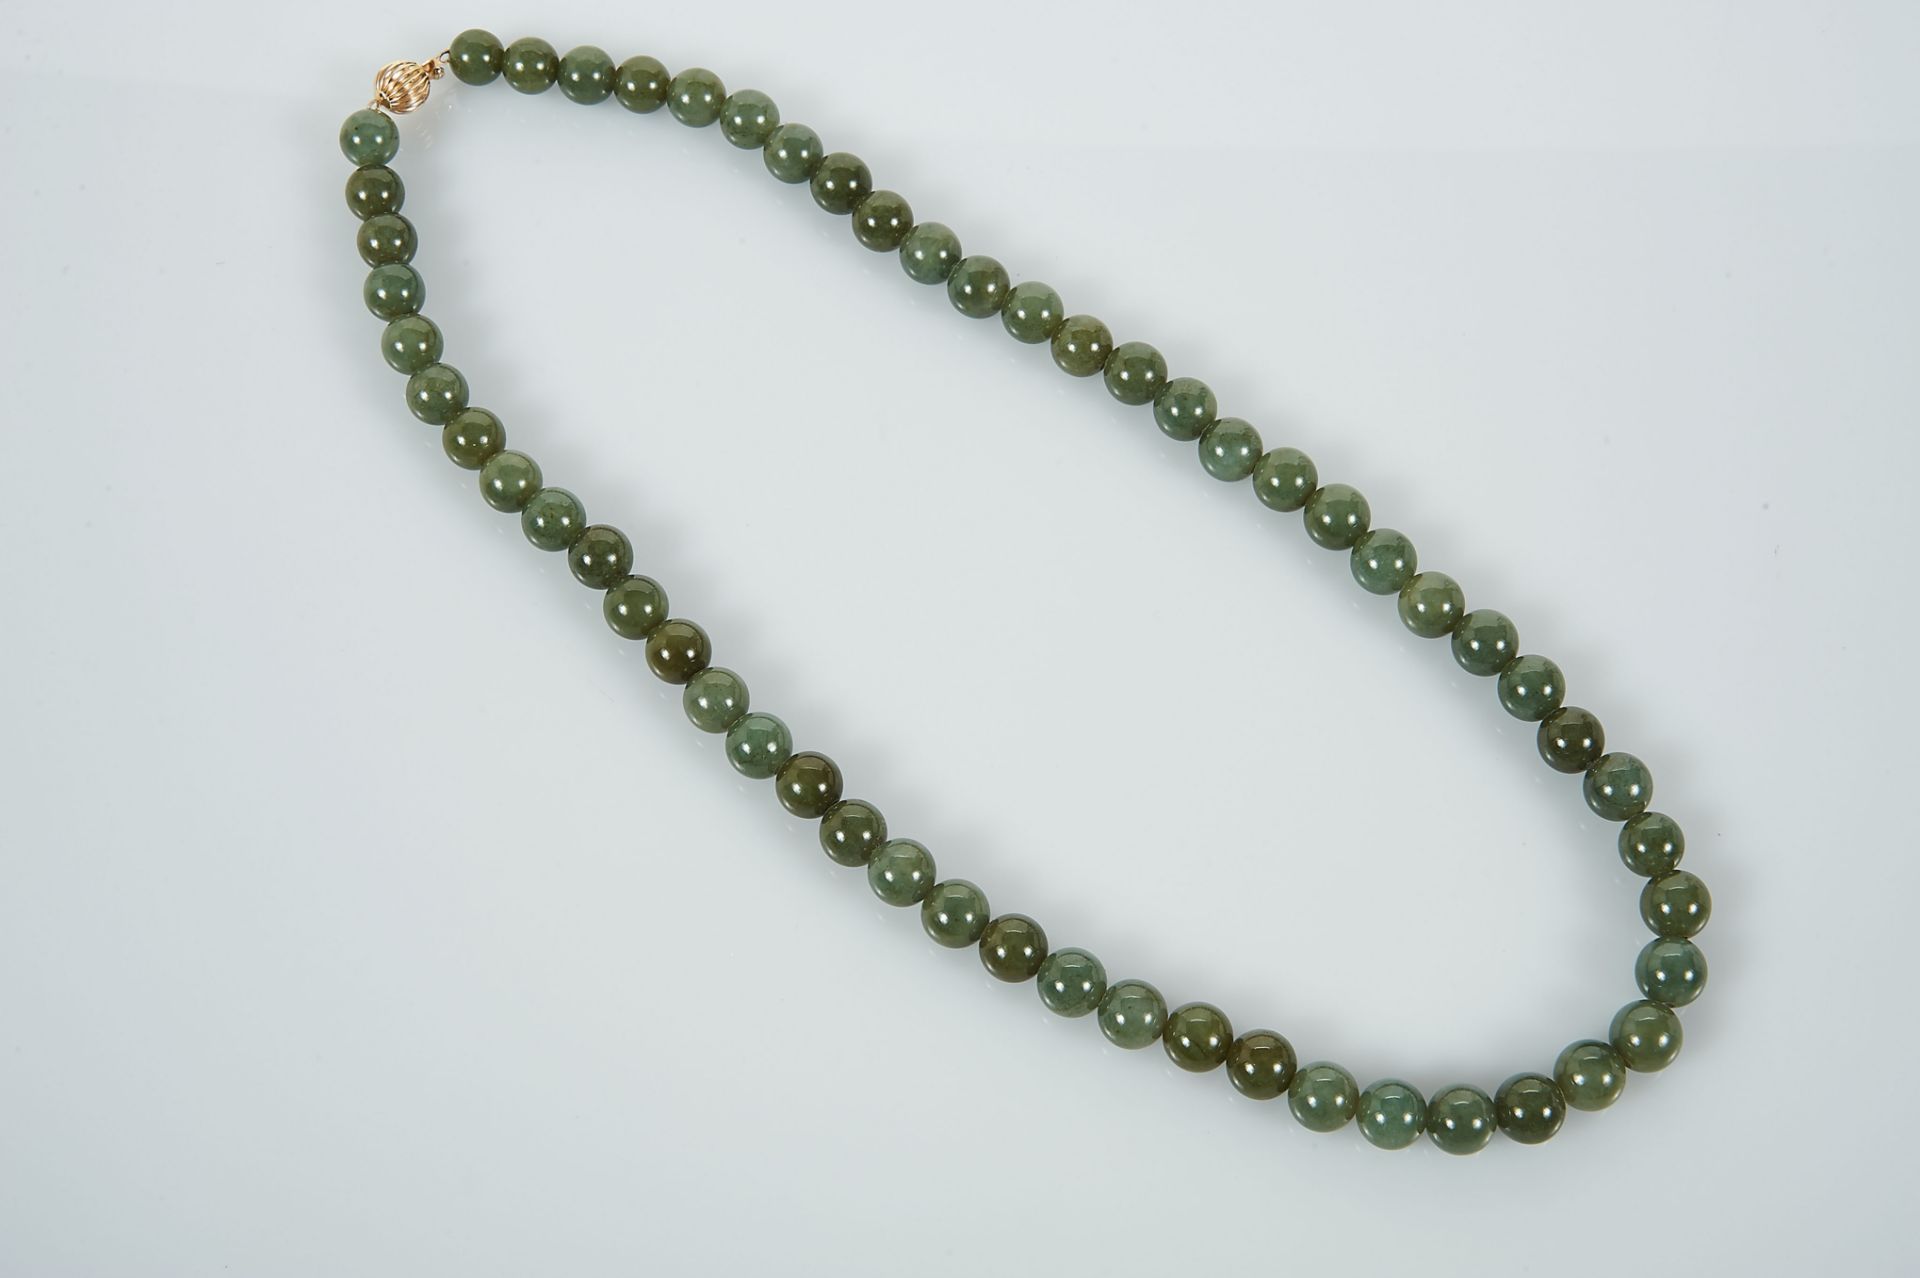 A Necklace, a string of 56 Jadeite beads (9 mm), gadrooned 14 kt. gold clasp, marked, Dim. - 57,5